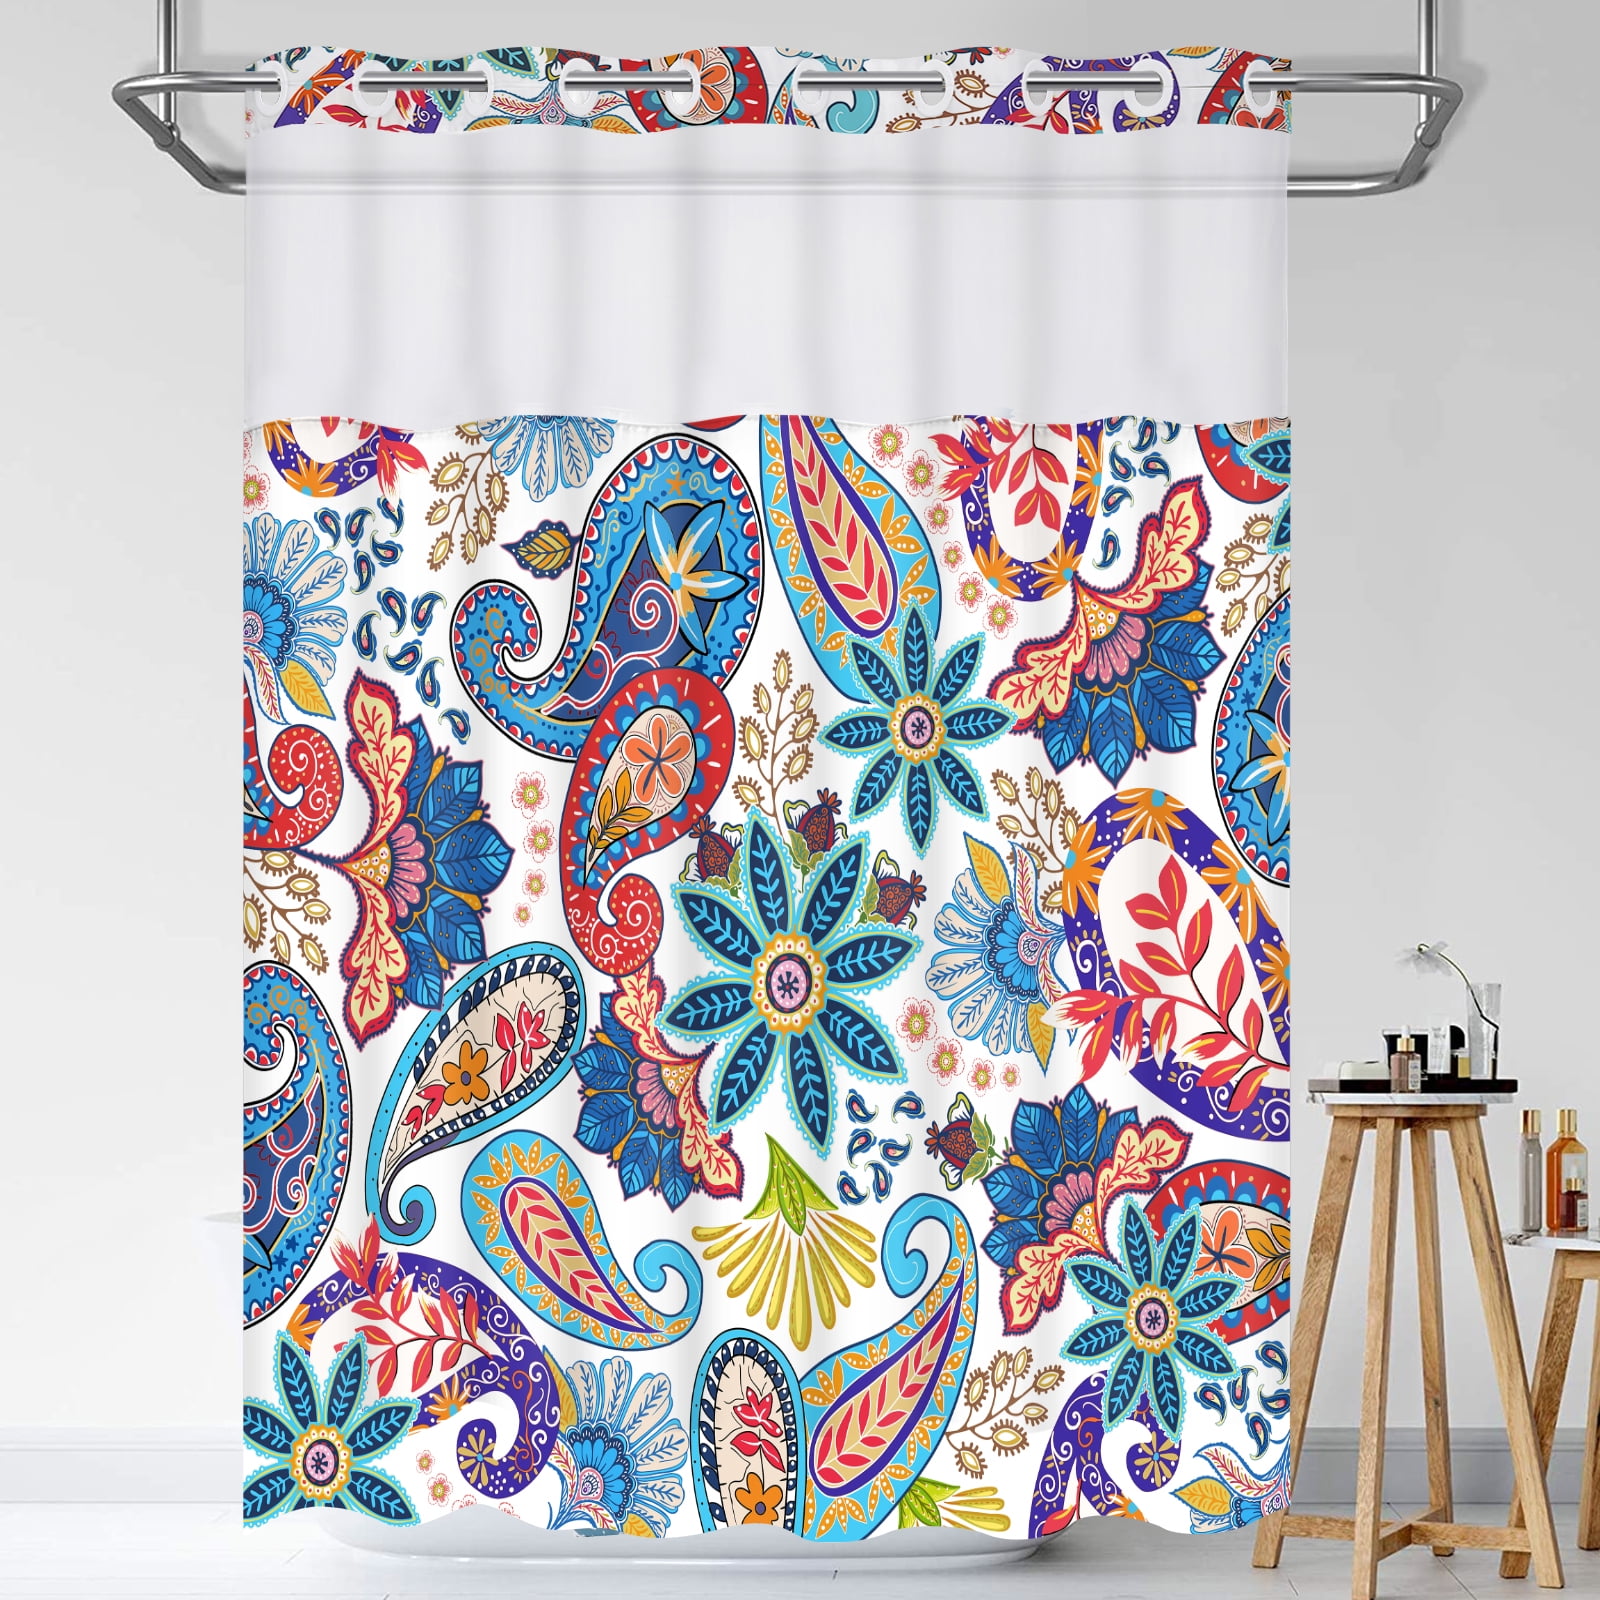 Ikfashoni Hookless Shower Curtain with Snap in Liner,Orange Floral